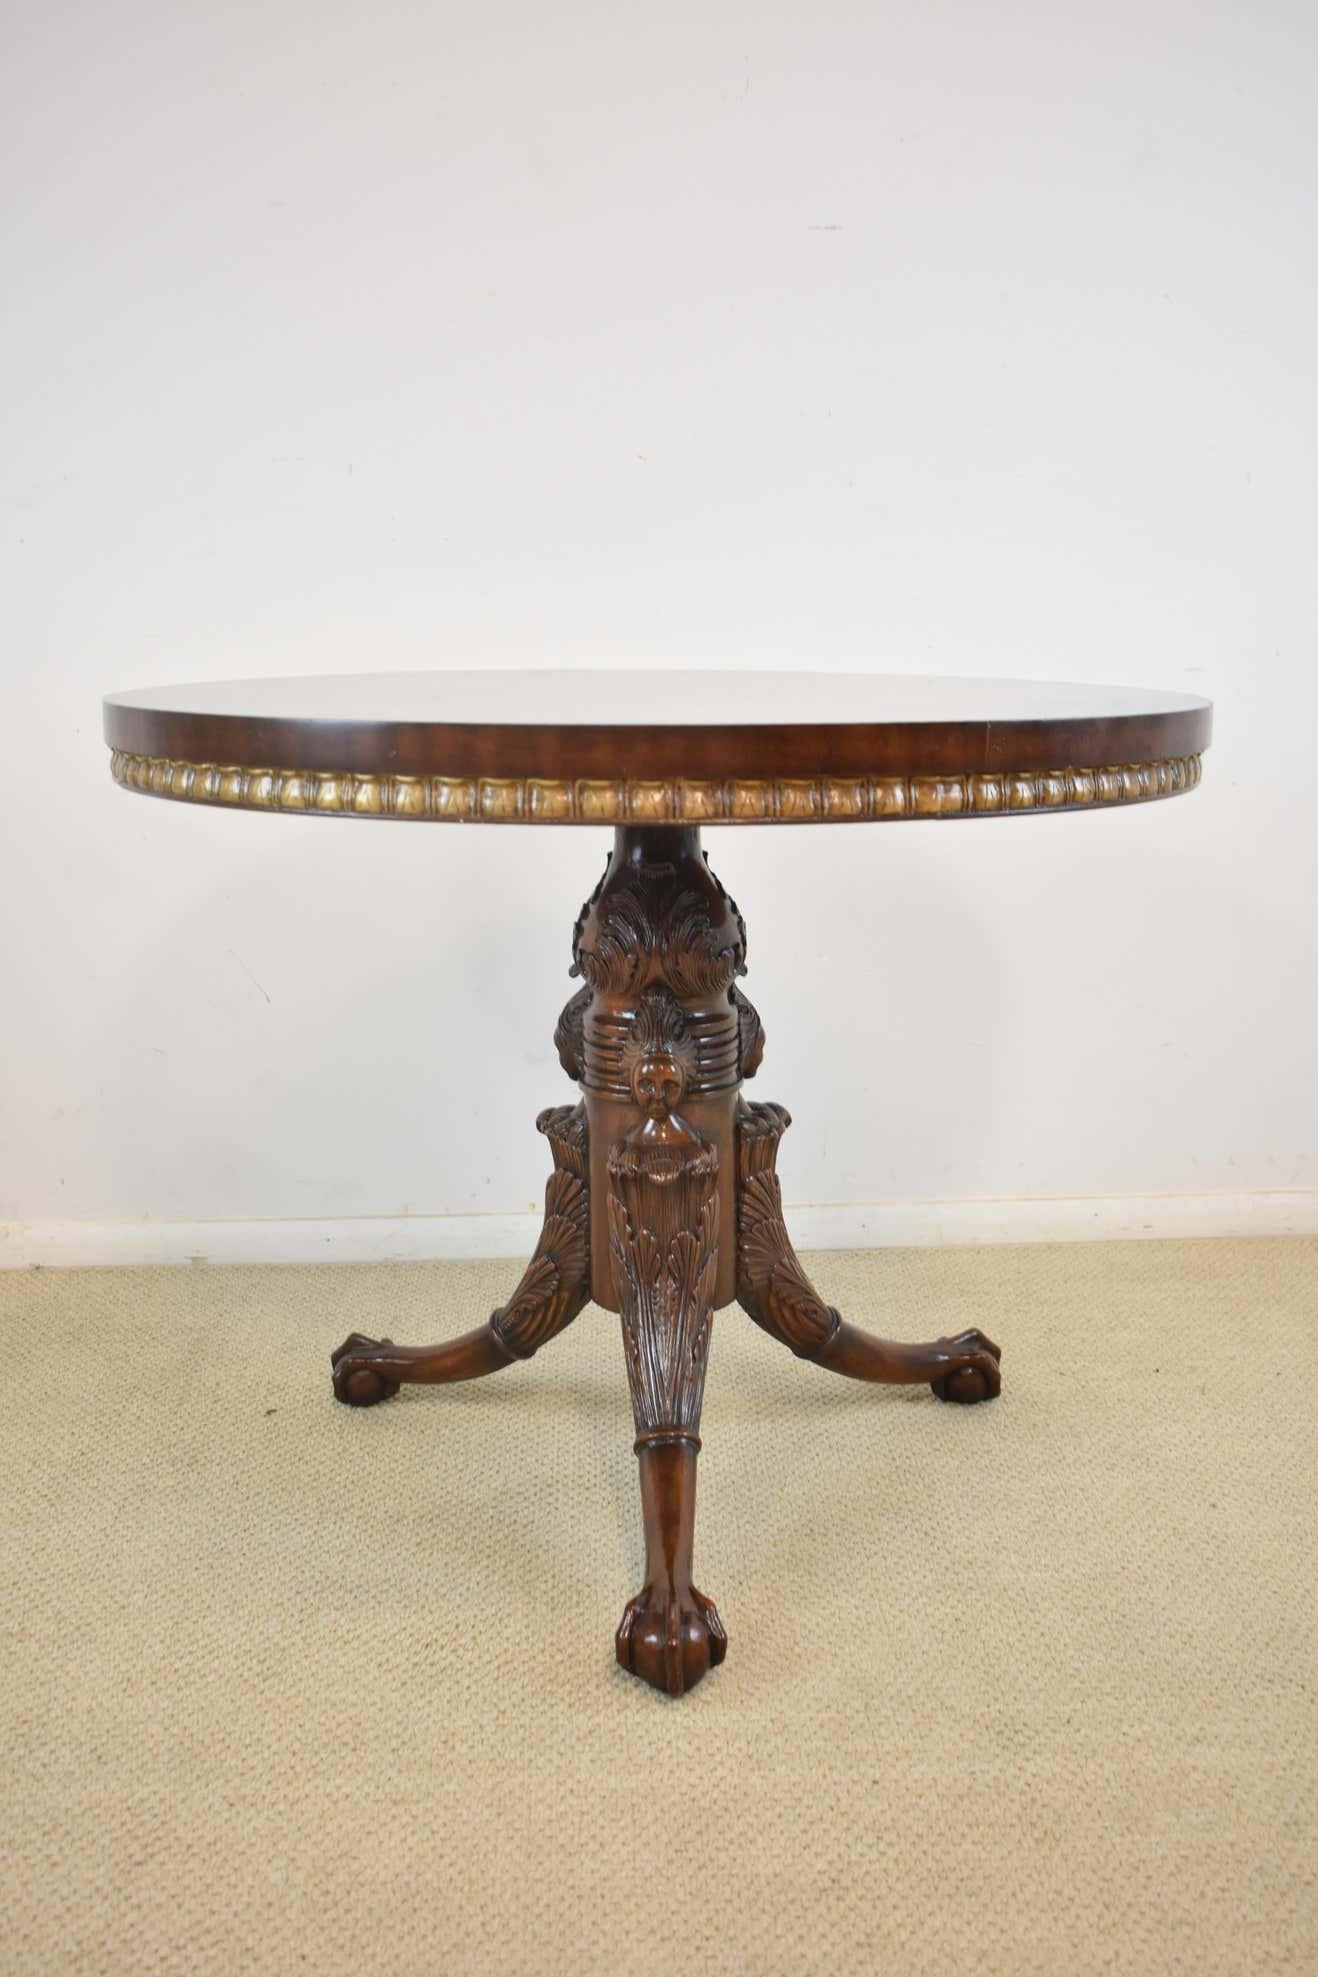 An elegant round center table by Maitland Smith. Mahogany with a hand-carved tripod base that features female figures and ball and claw feet. The round burled top has a gold gilt banding around the edge. This table is in beautiful condition.